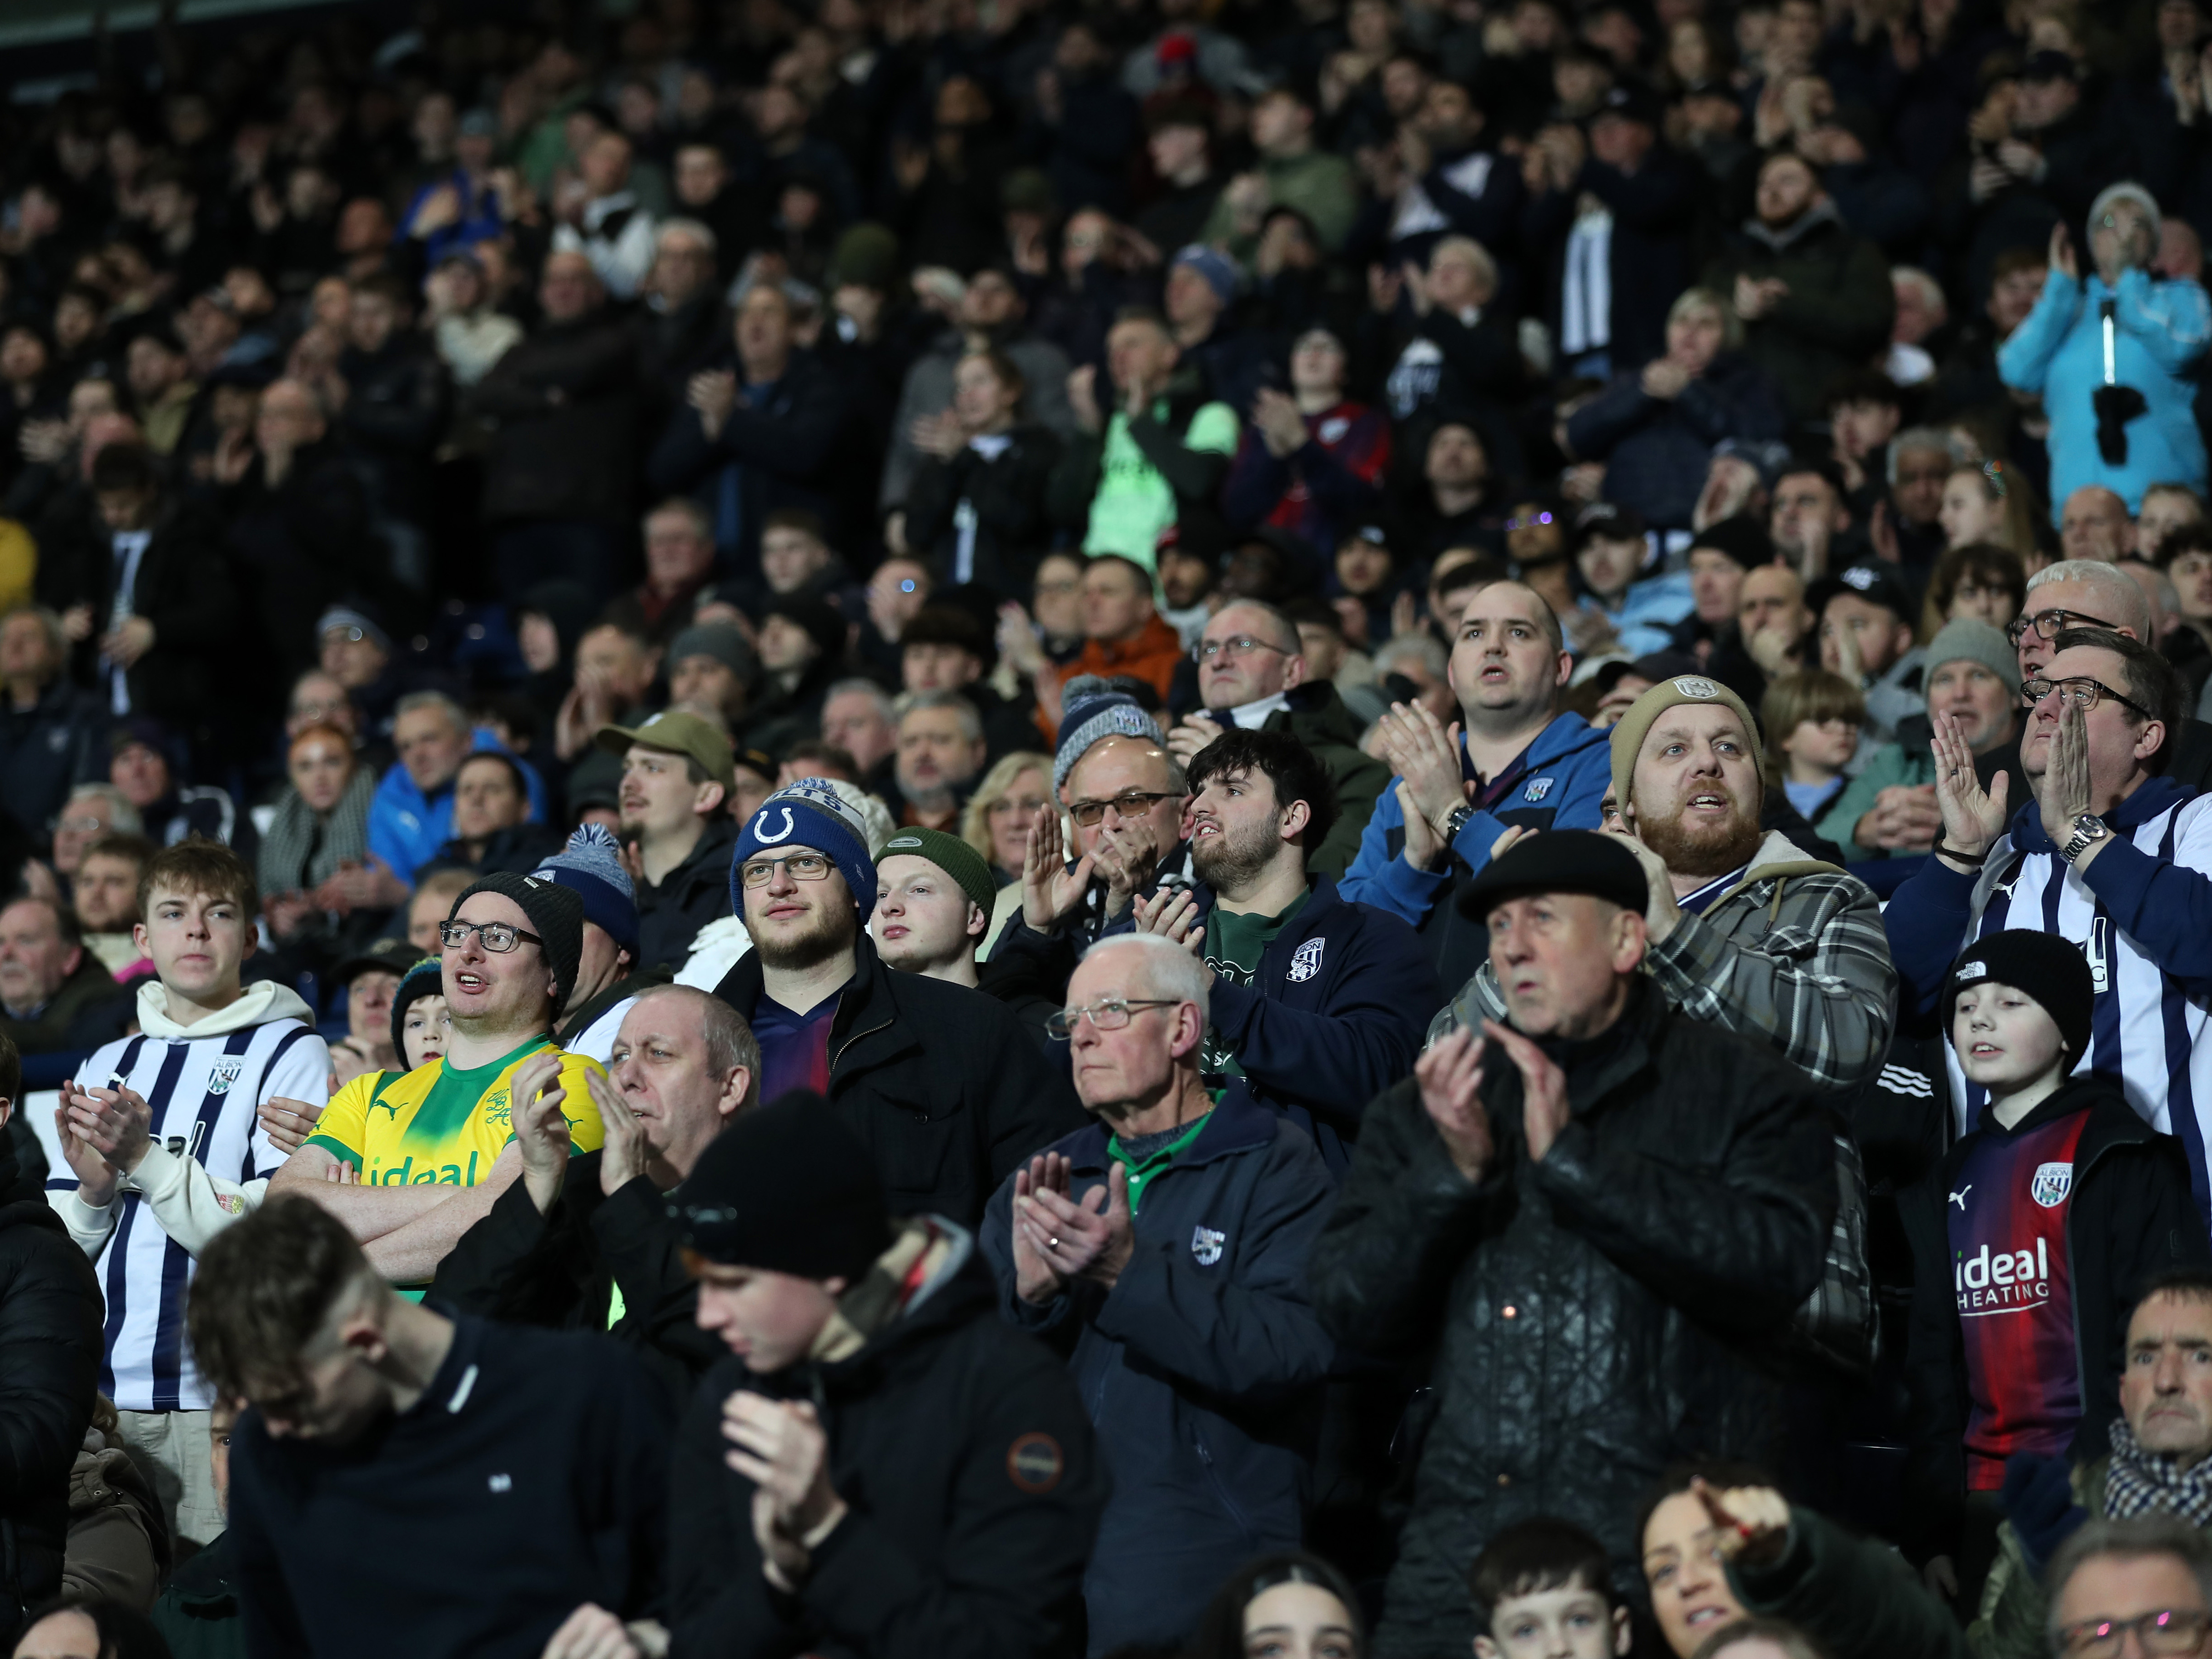 A general view of Albion supporters in the stands at The Hawthorns